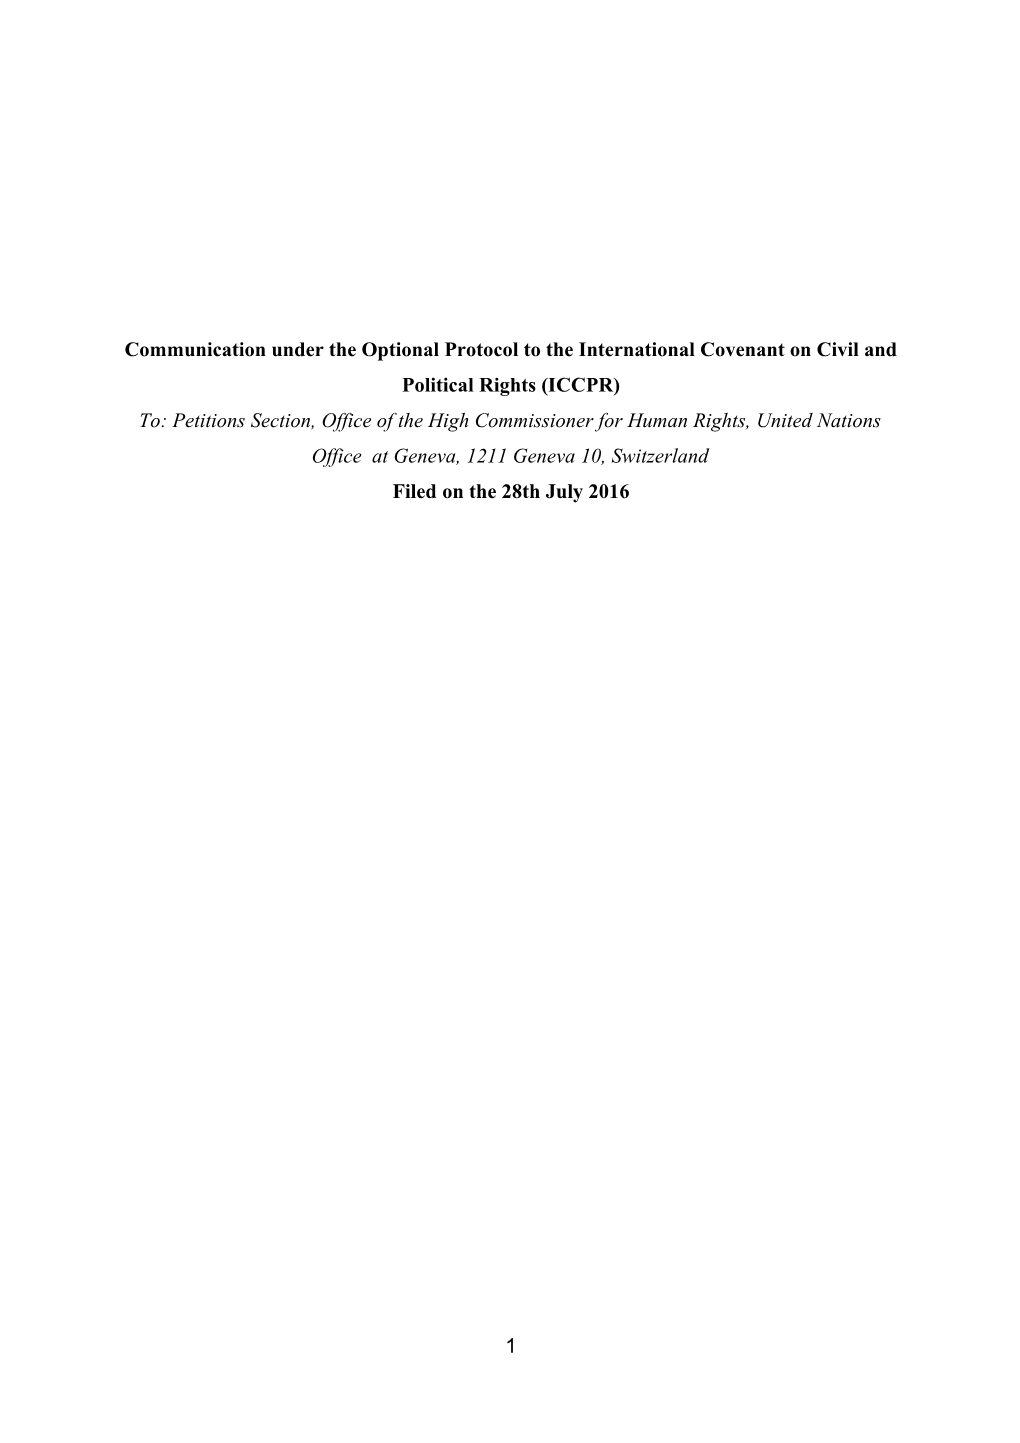 Communication Under the Optional Protocol to the ICCPR